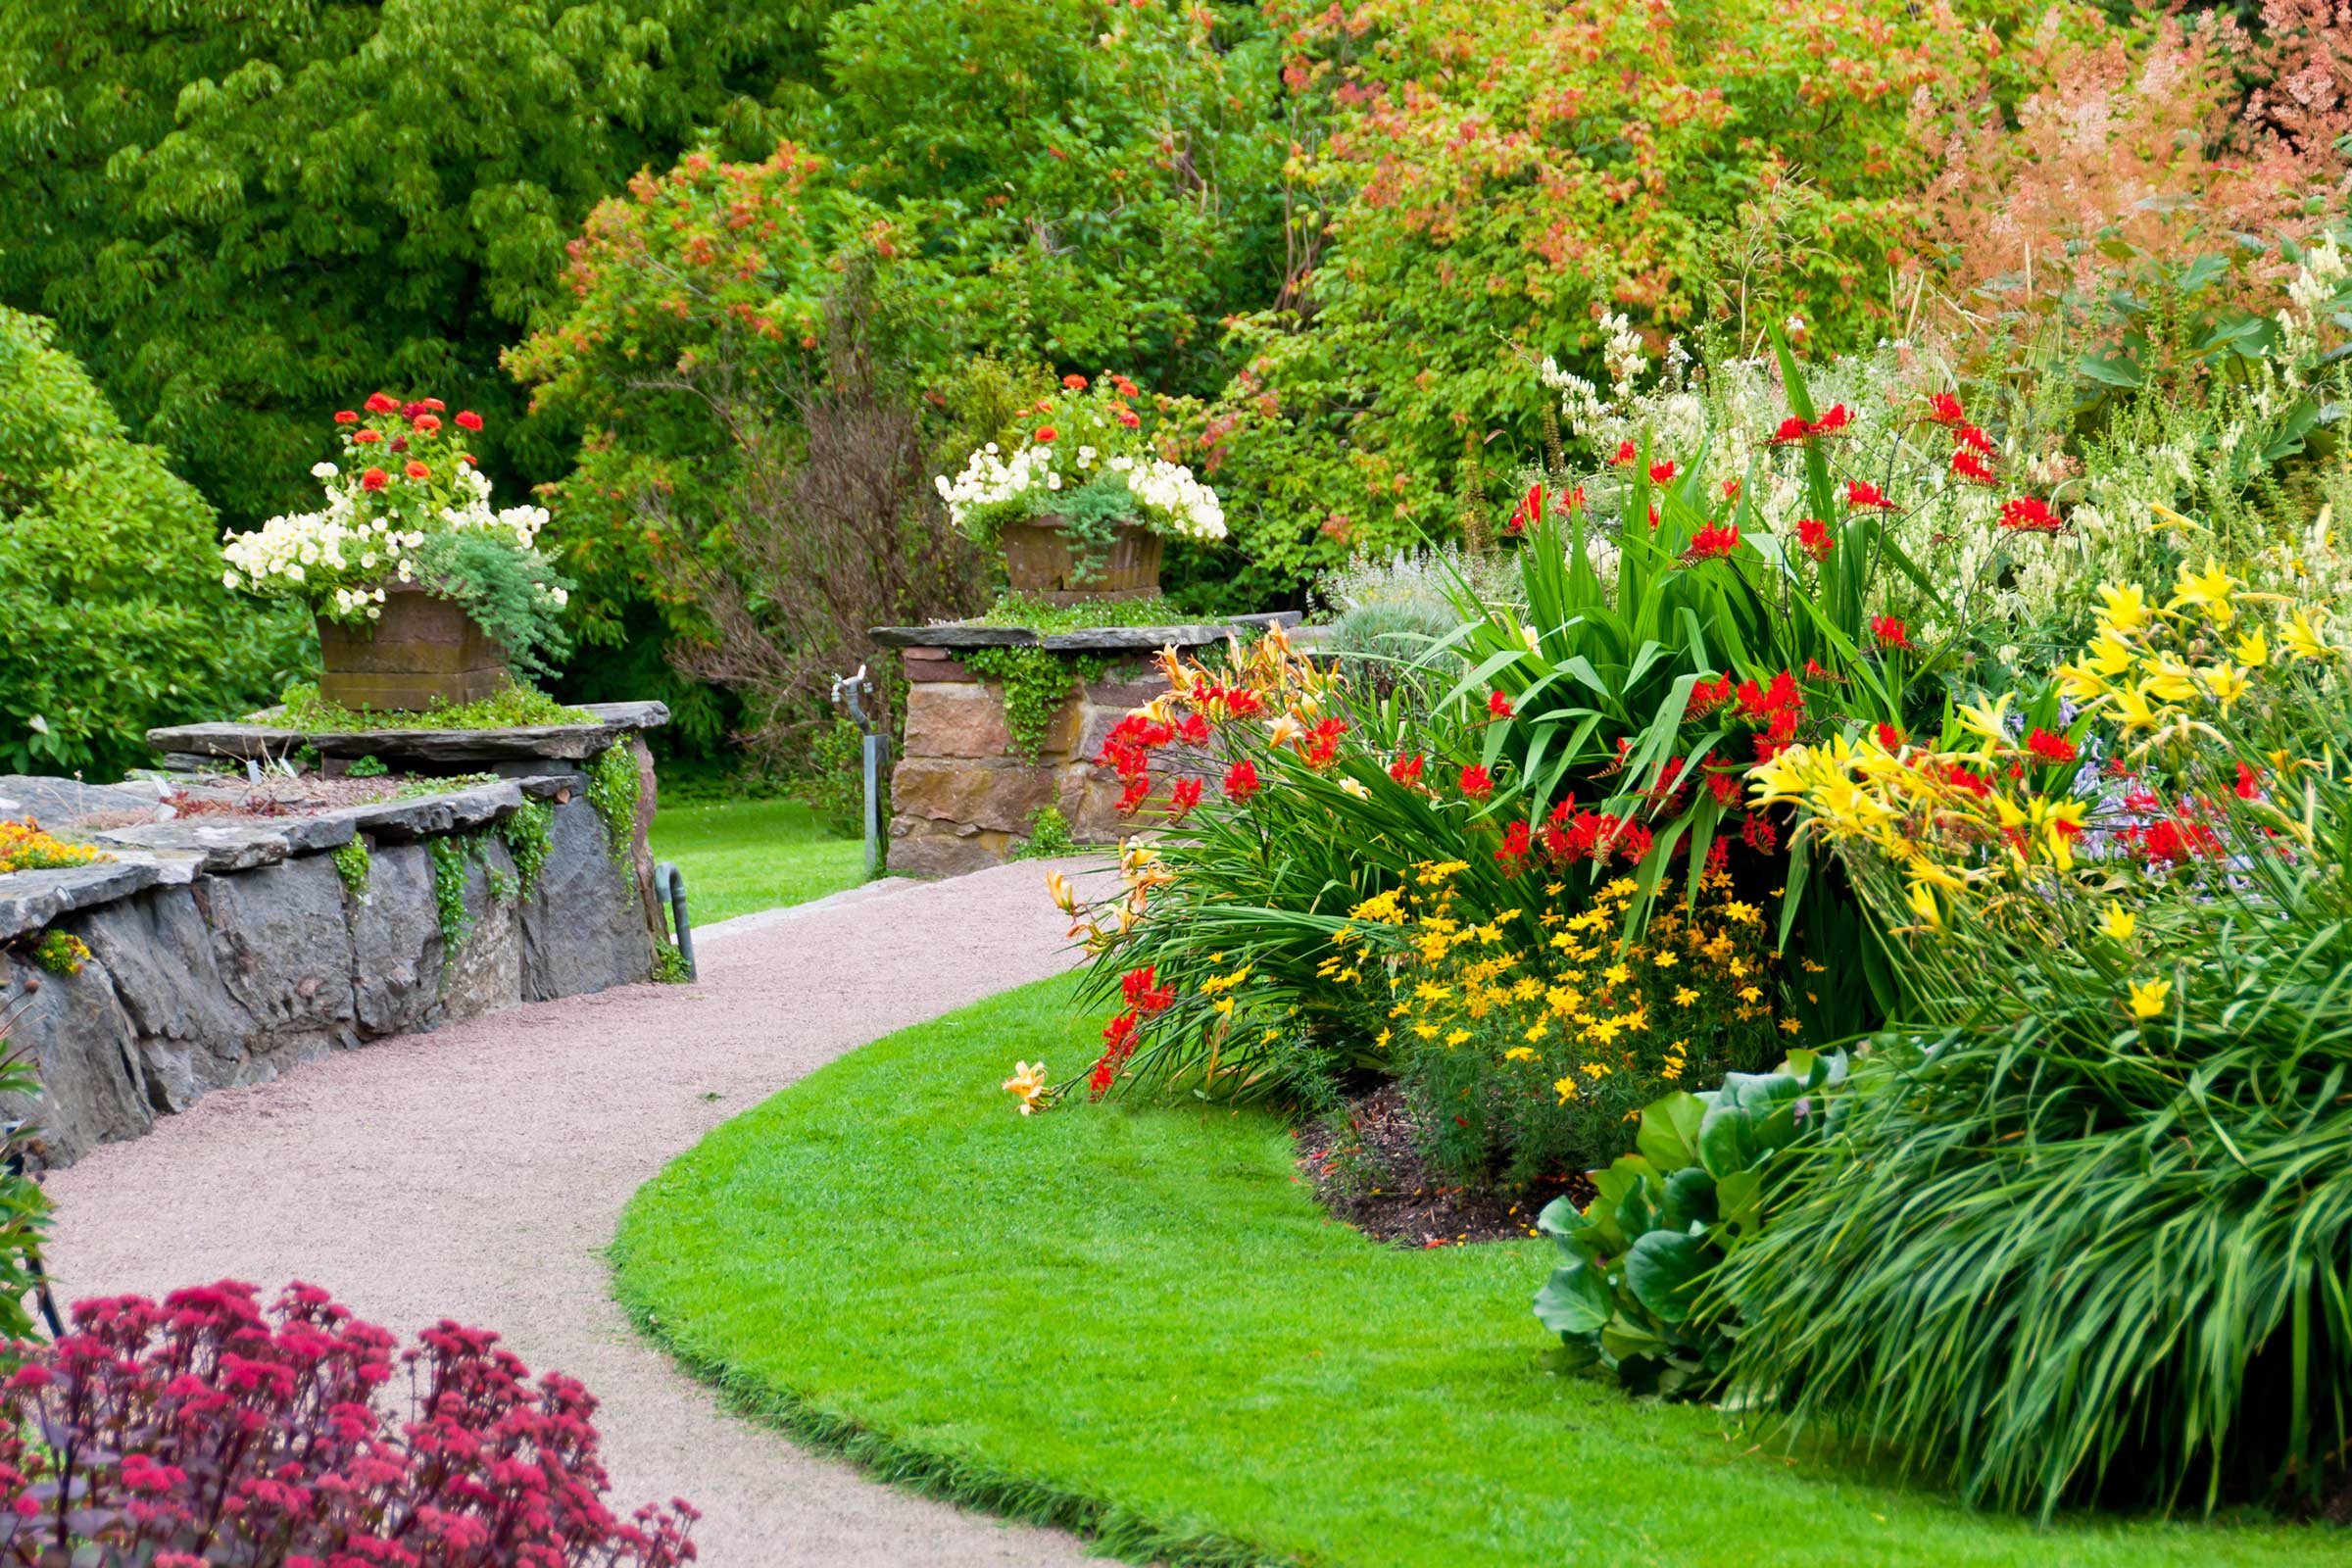 Landscape Plan: How to Create a Lovely Yard | Reader's Digest